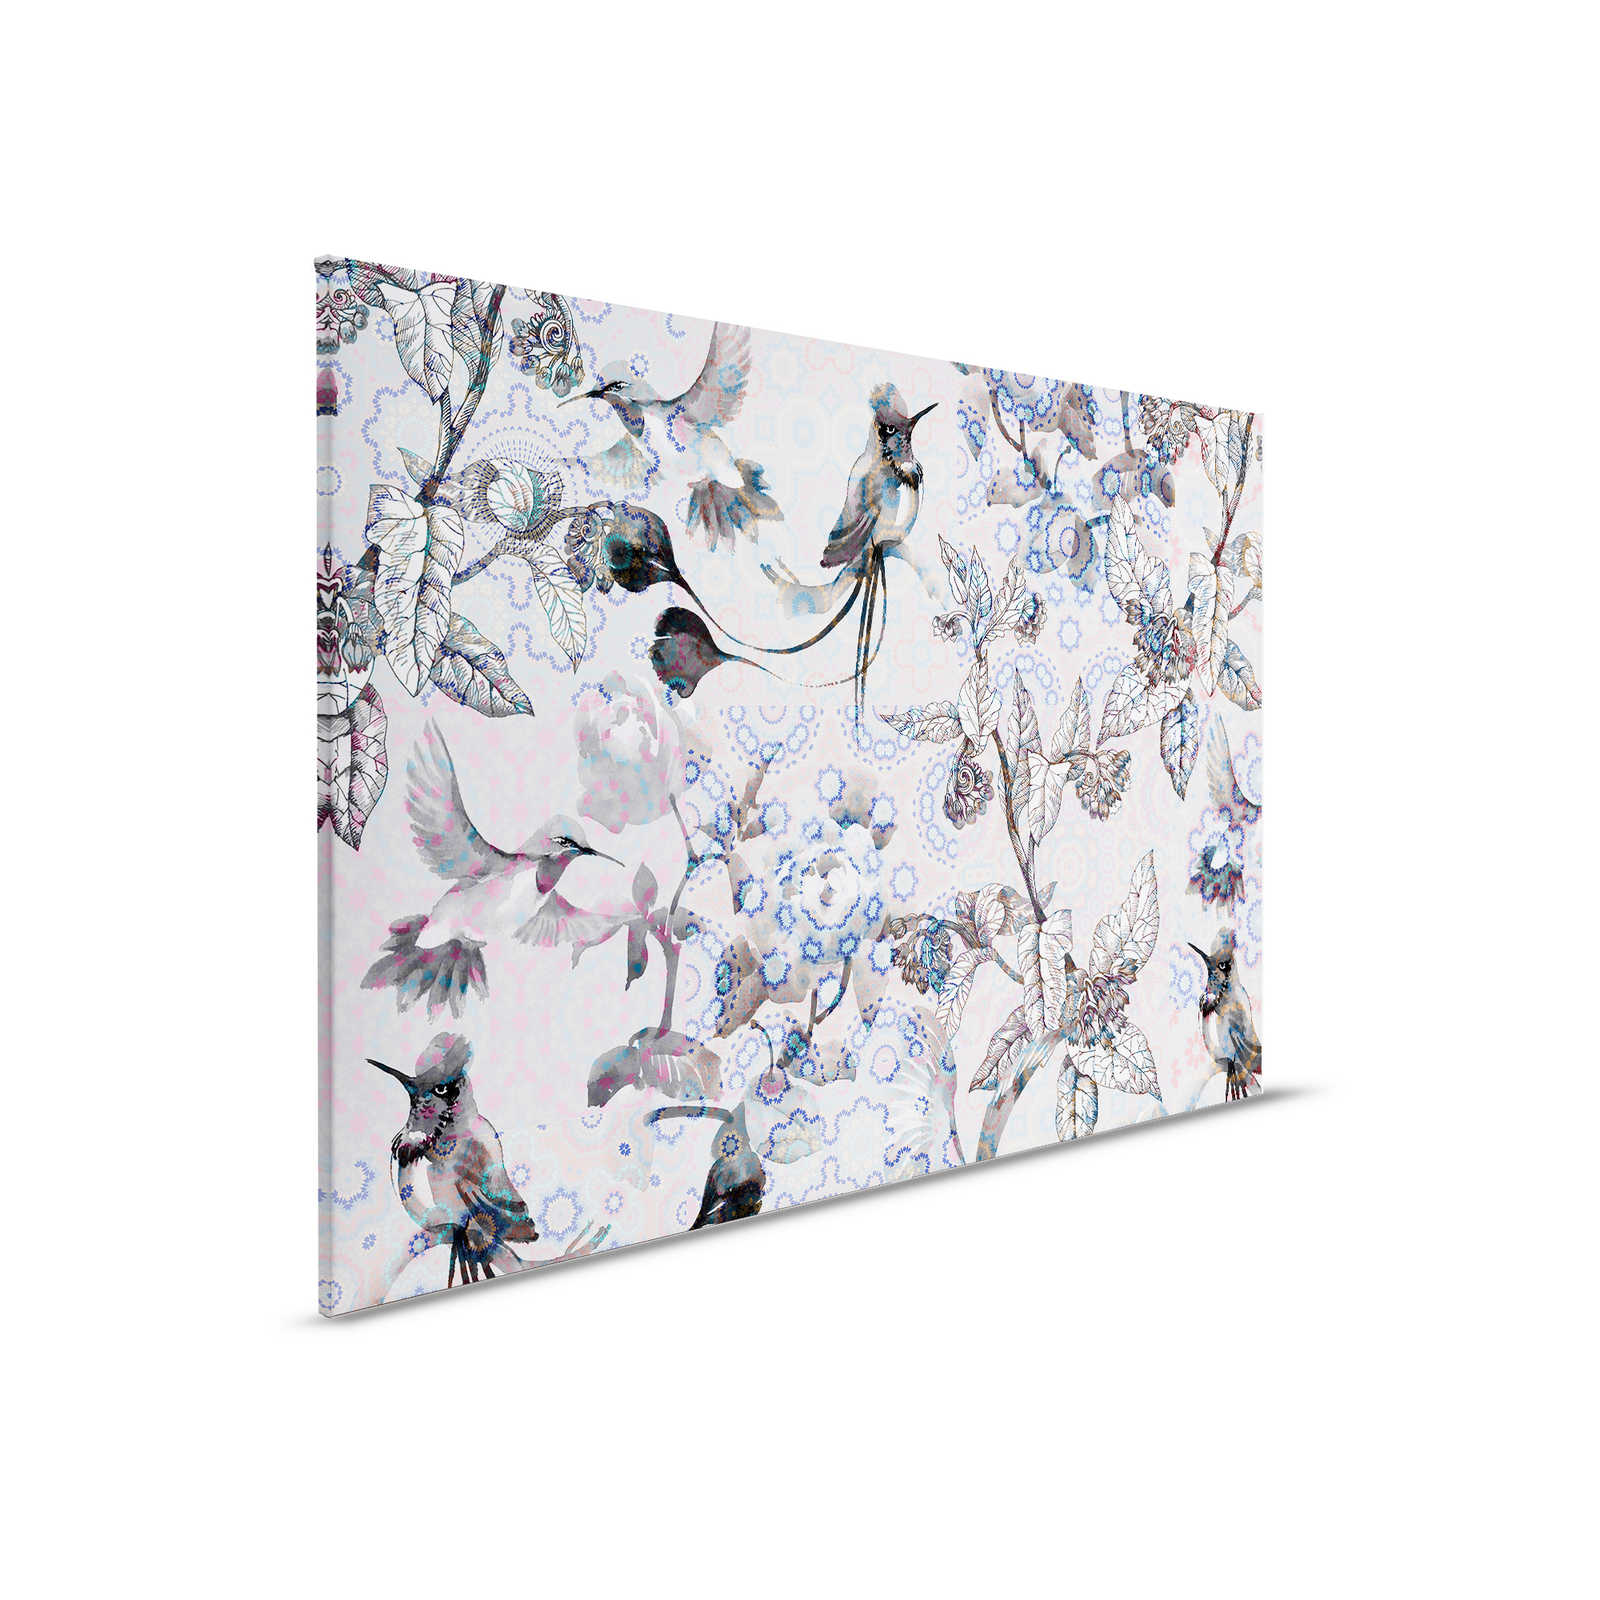         Canvas painting Nature Design in collage style | exotic mosaic 3 - 0,90 m x 0,60 m
    